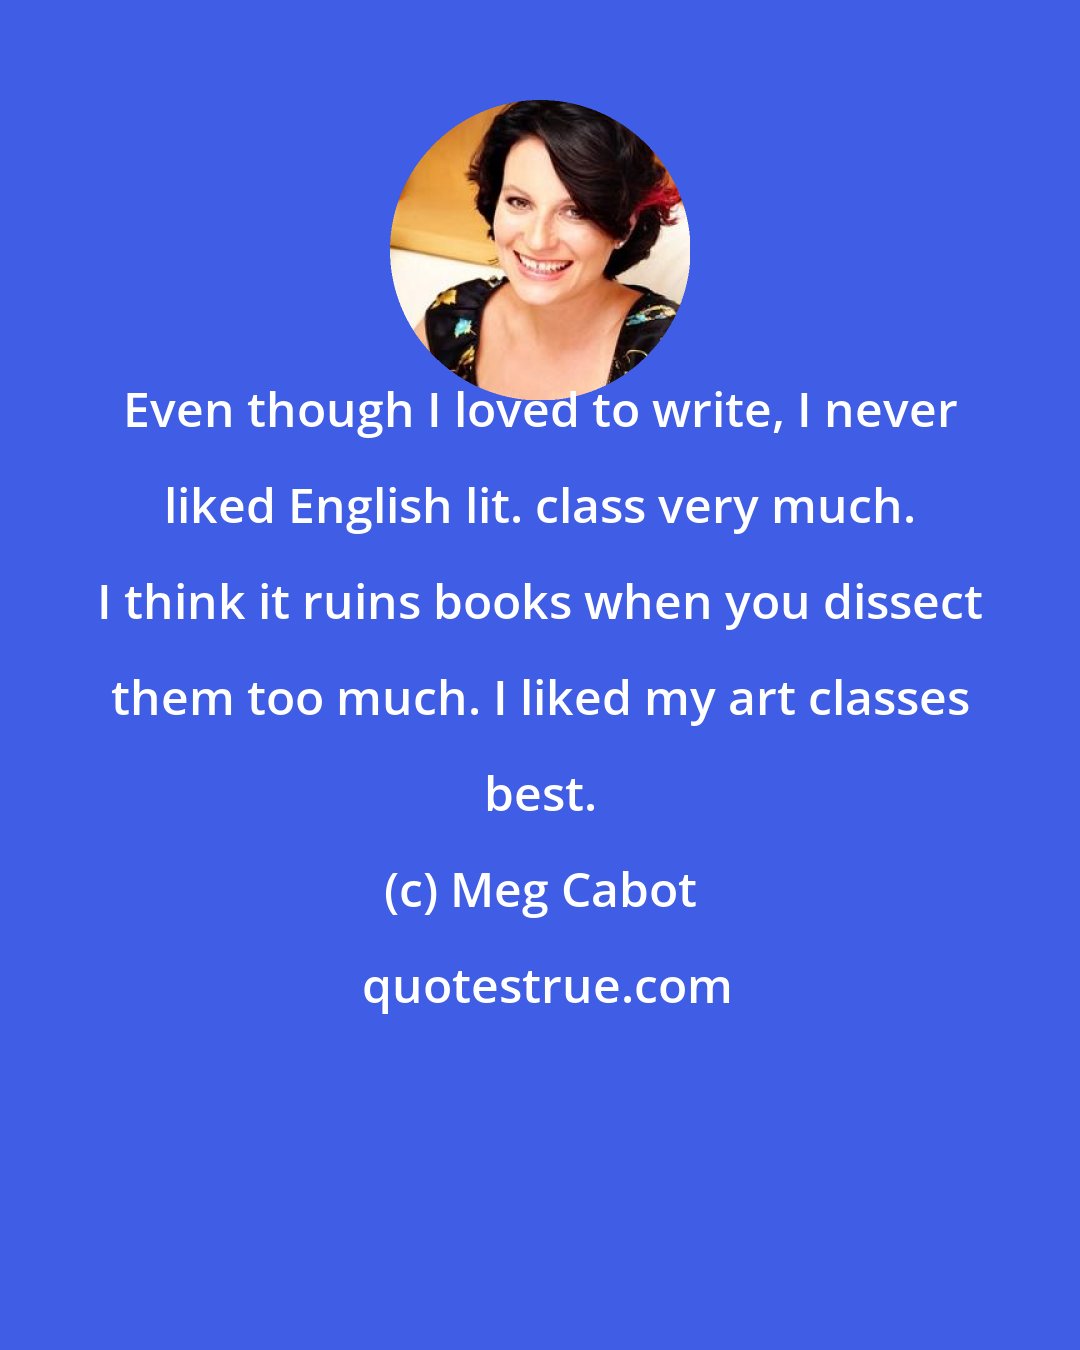 Meg Cabot: Even though I loved to write, I never liked English lit. class very much. I think it ruins books when you dissect them too much. I liked my art classes best.